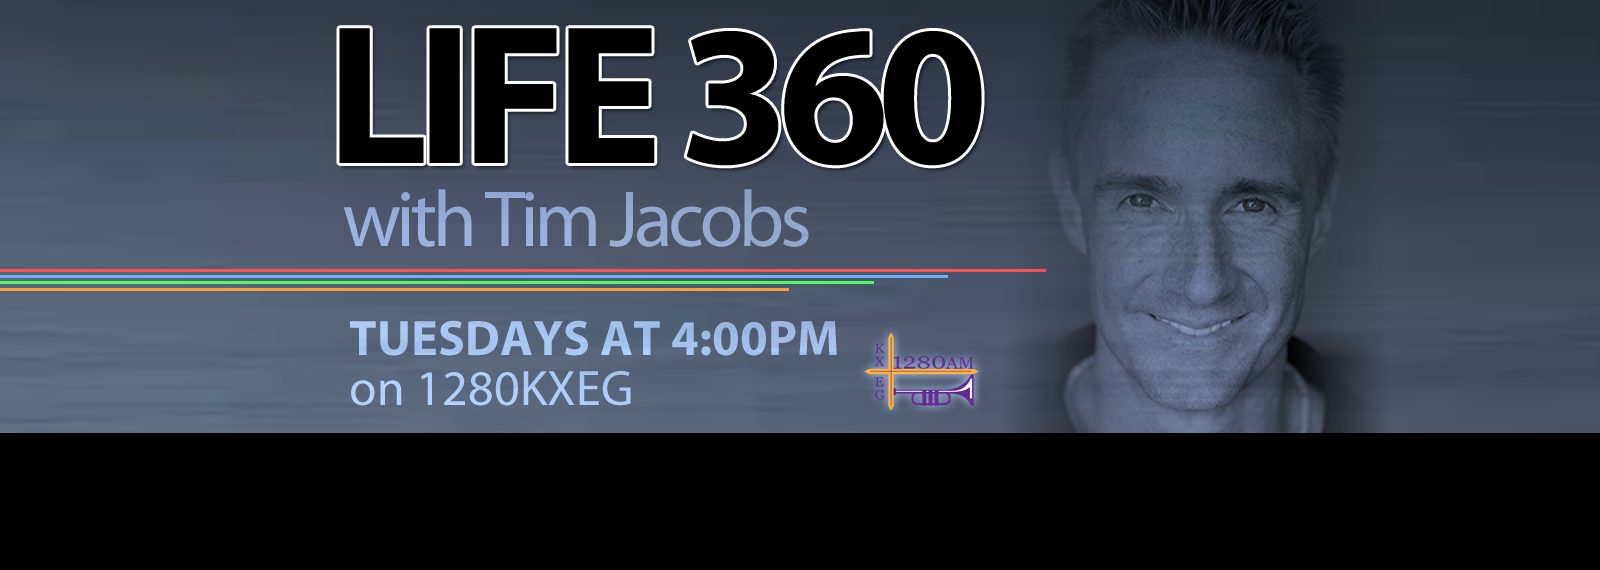 Life360 with Tim Jacobs header image 1